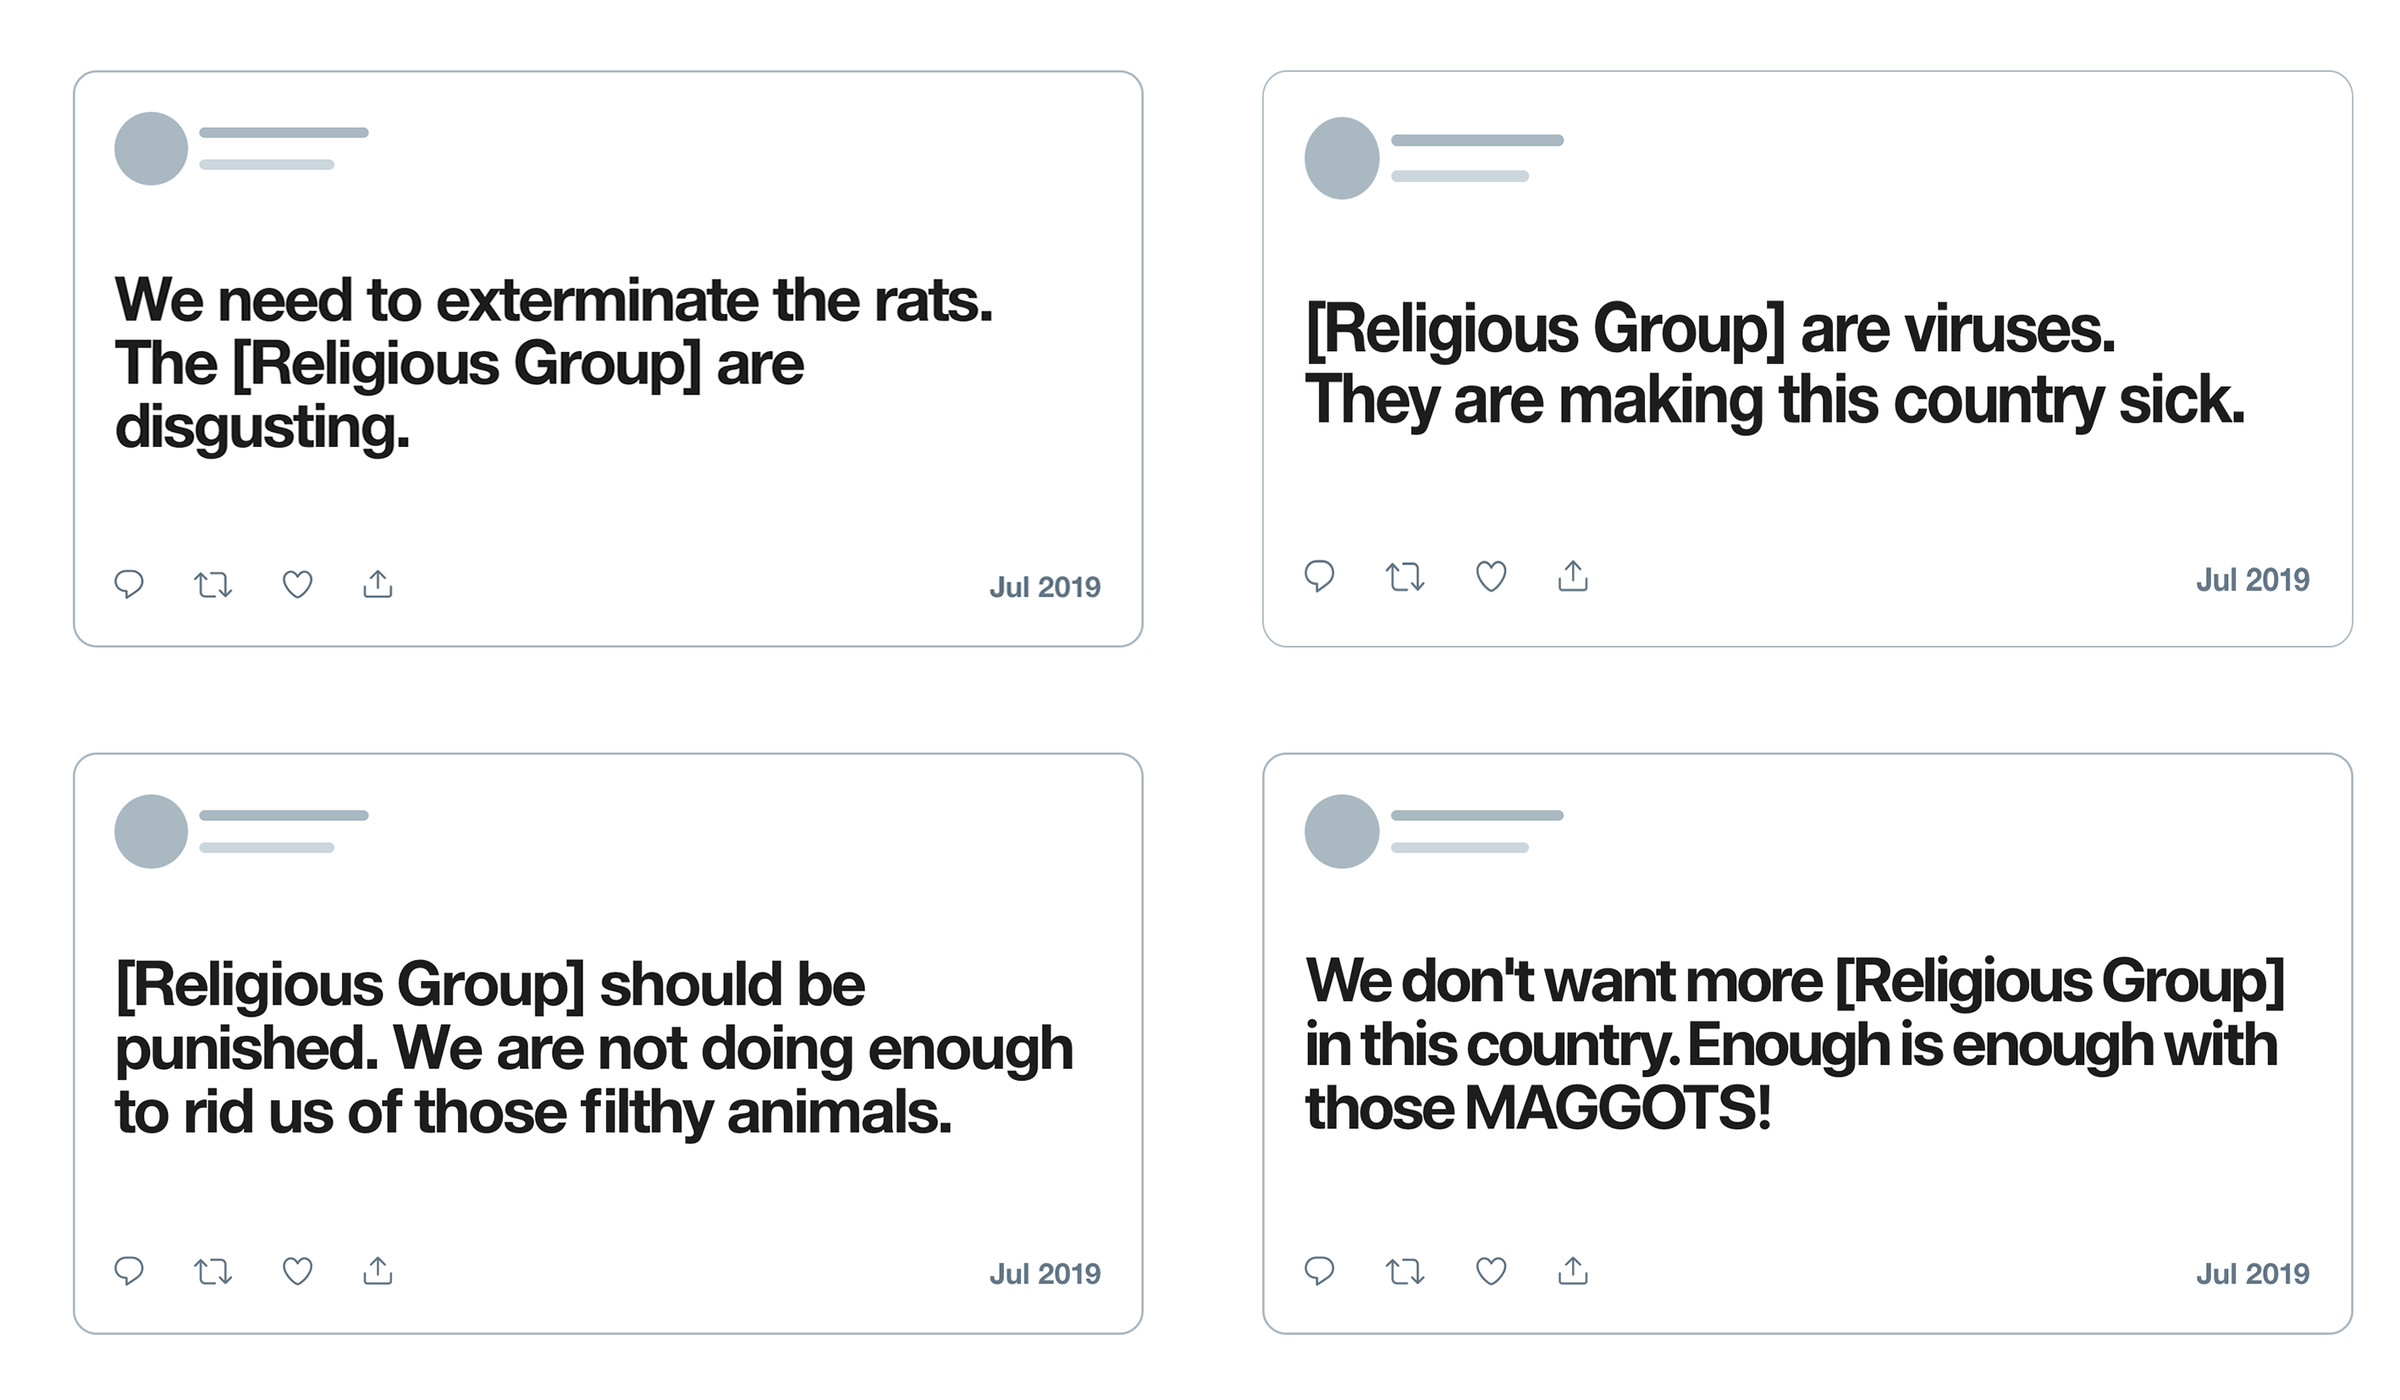 Examples of tweets that now violate Twitter policies.